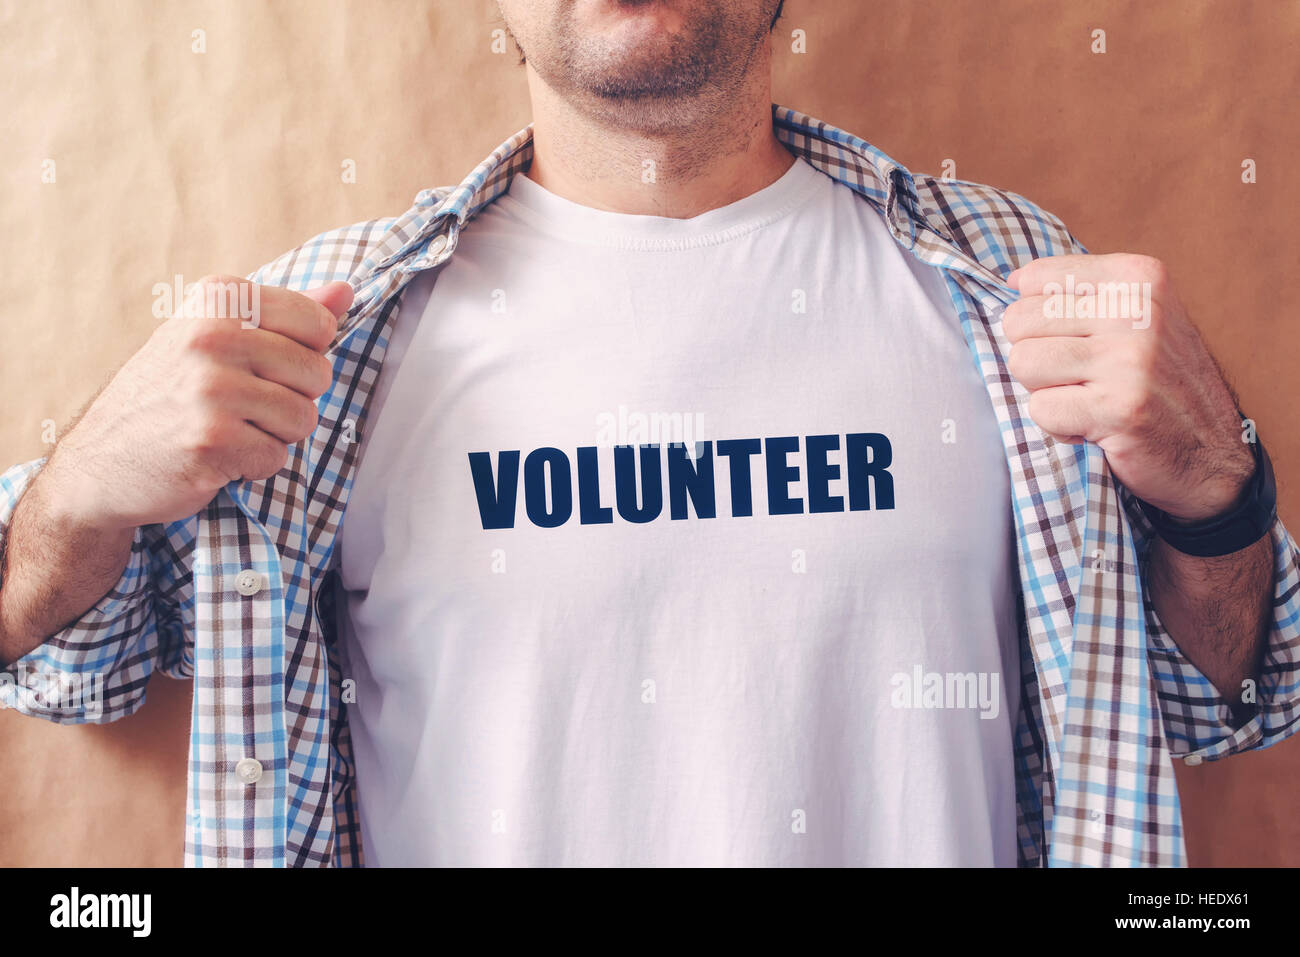 Man is volunteer, confident friendly person offering help Stock Photo